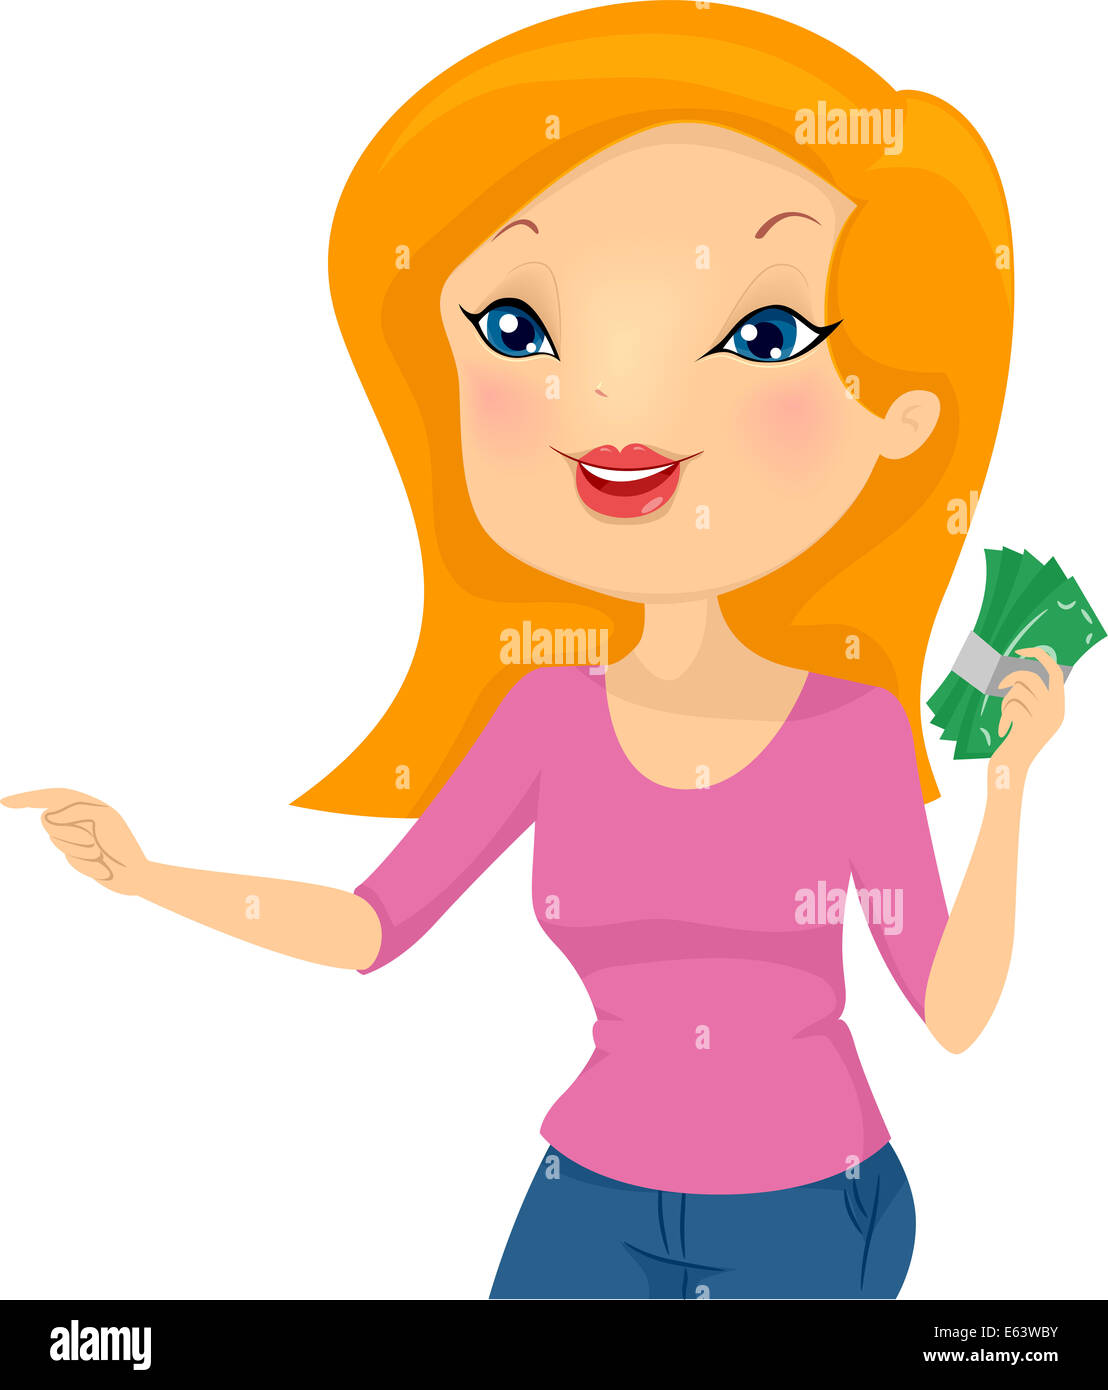 Illustration of a Girl Holding a Wad of Cash Pointing to the Right Stock Photo